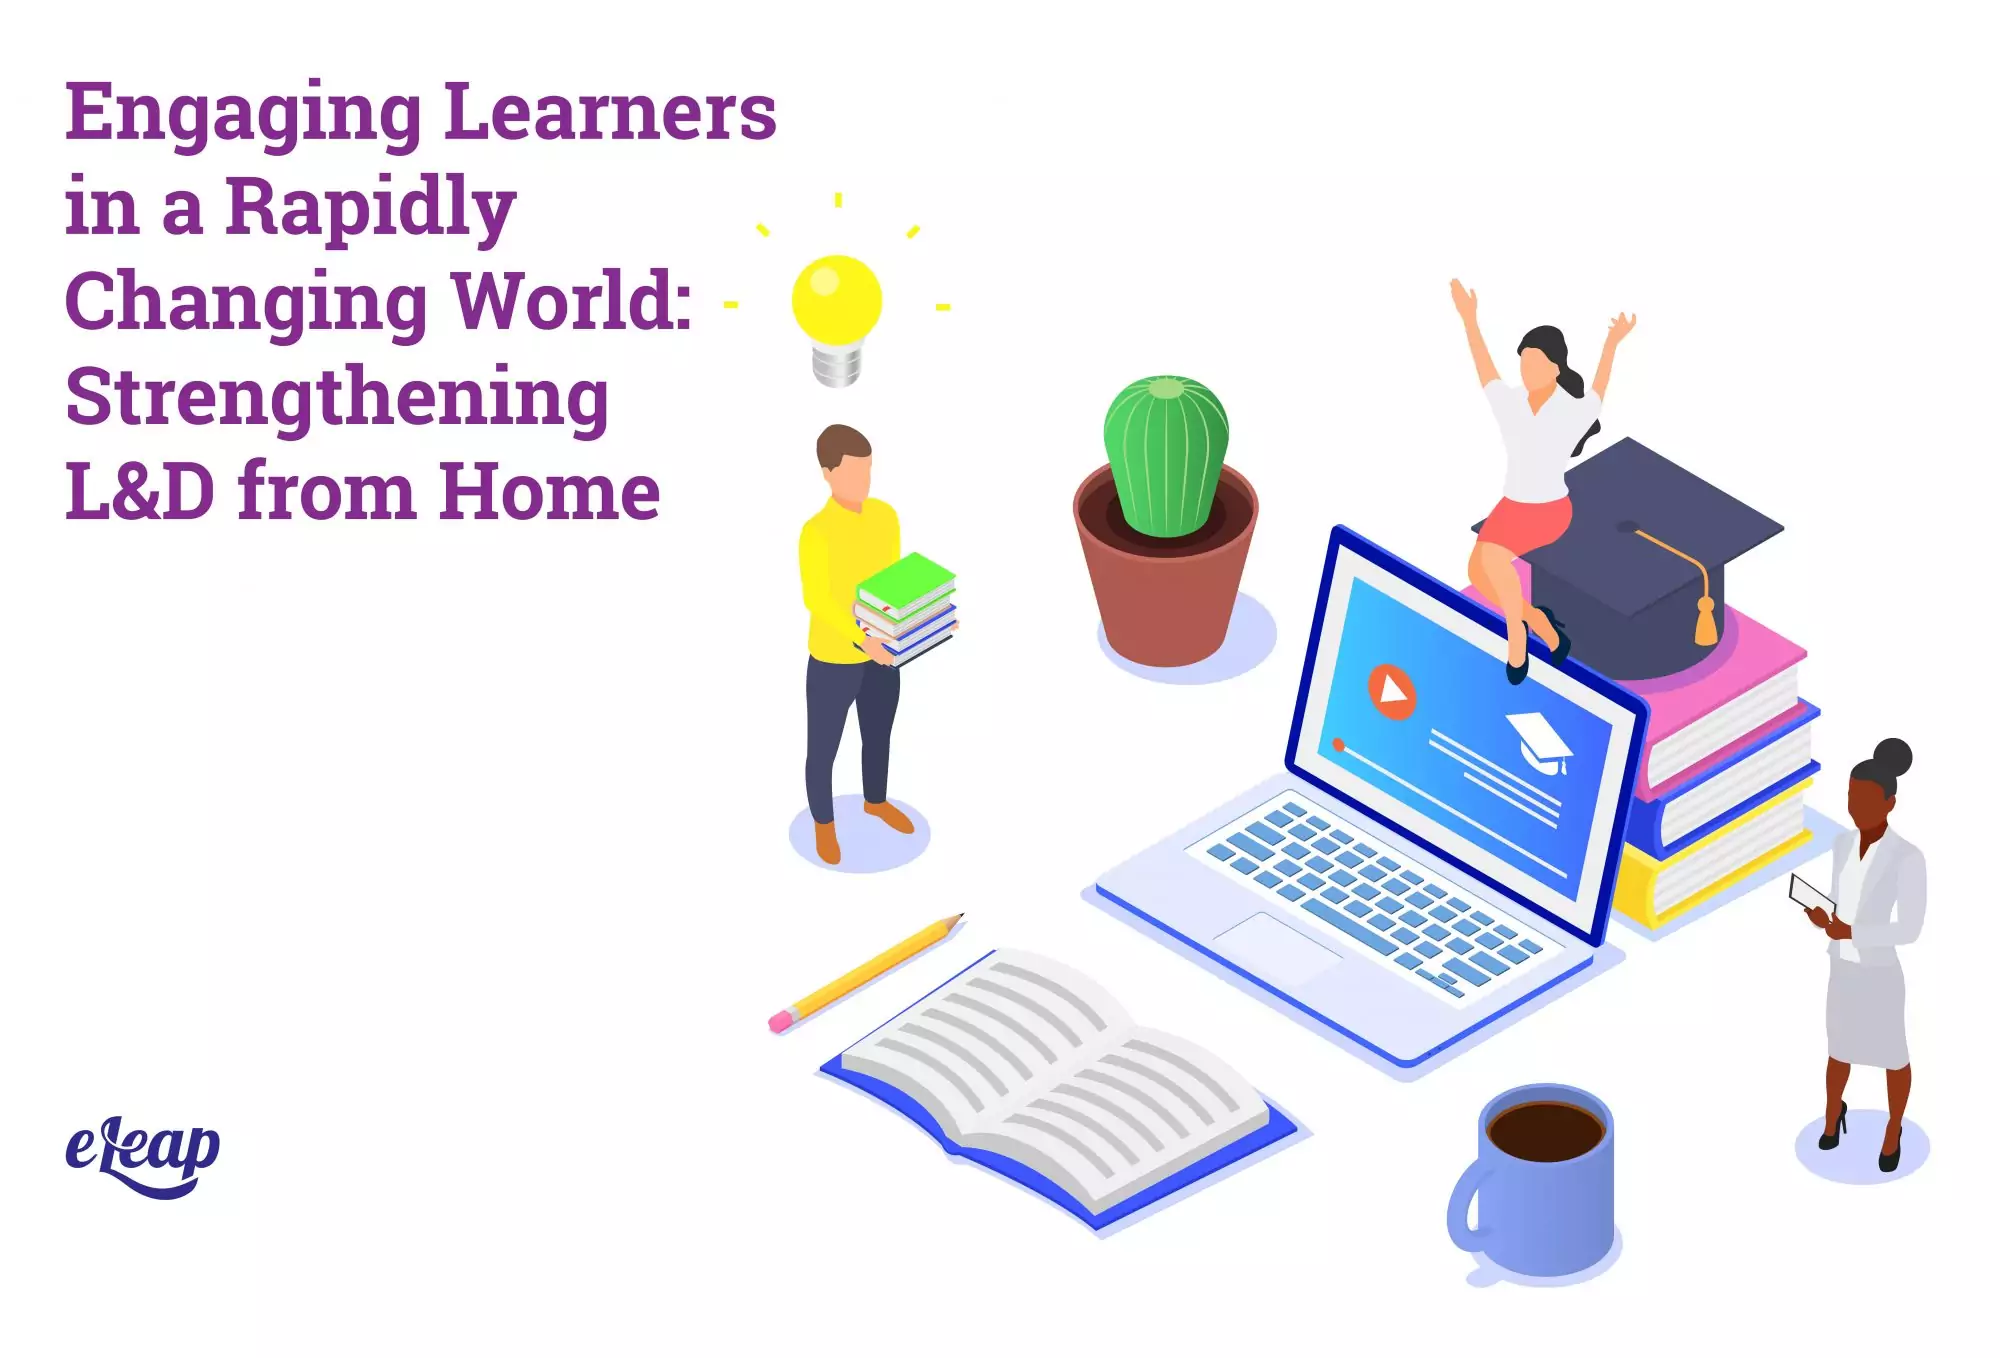 Engaging Learning in a Rapidly Changing World: Strengthening At-Home L&D